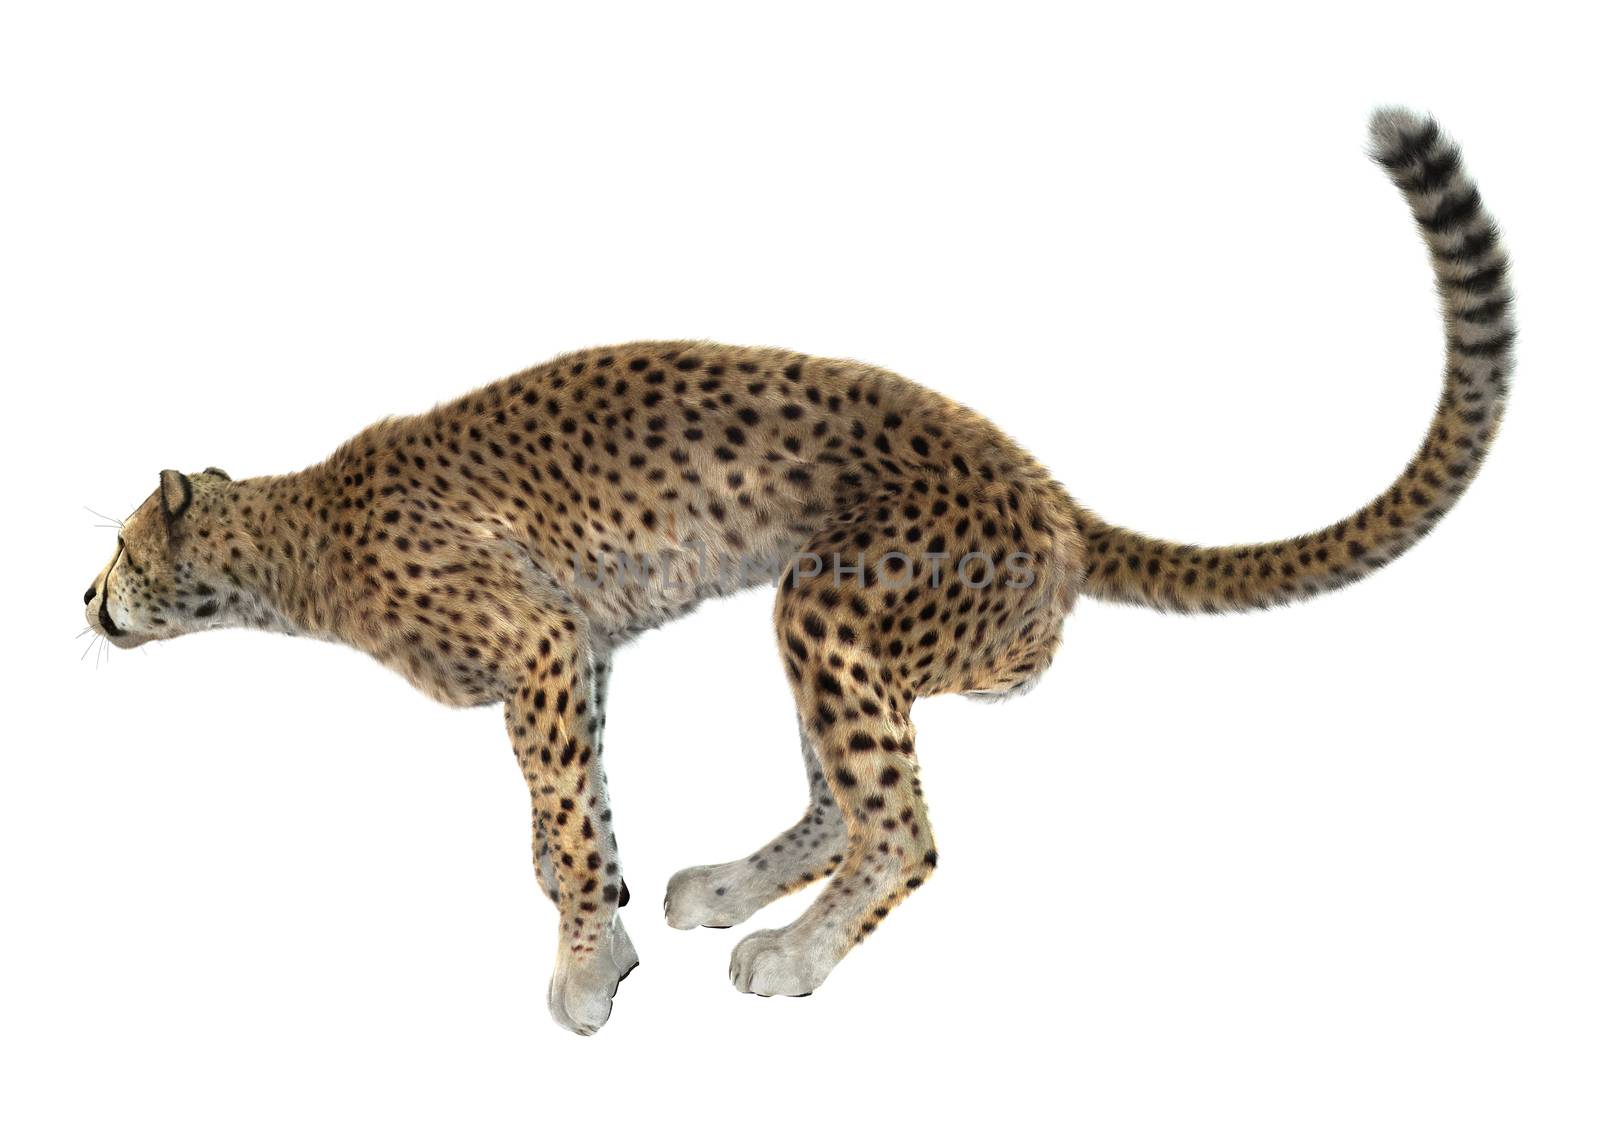 3D digital render of a big cat cheetah ready to jump isolated on white background